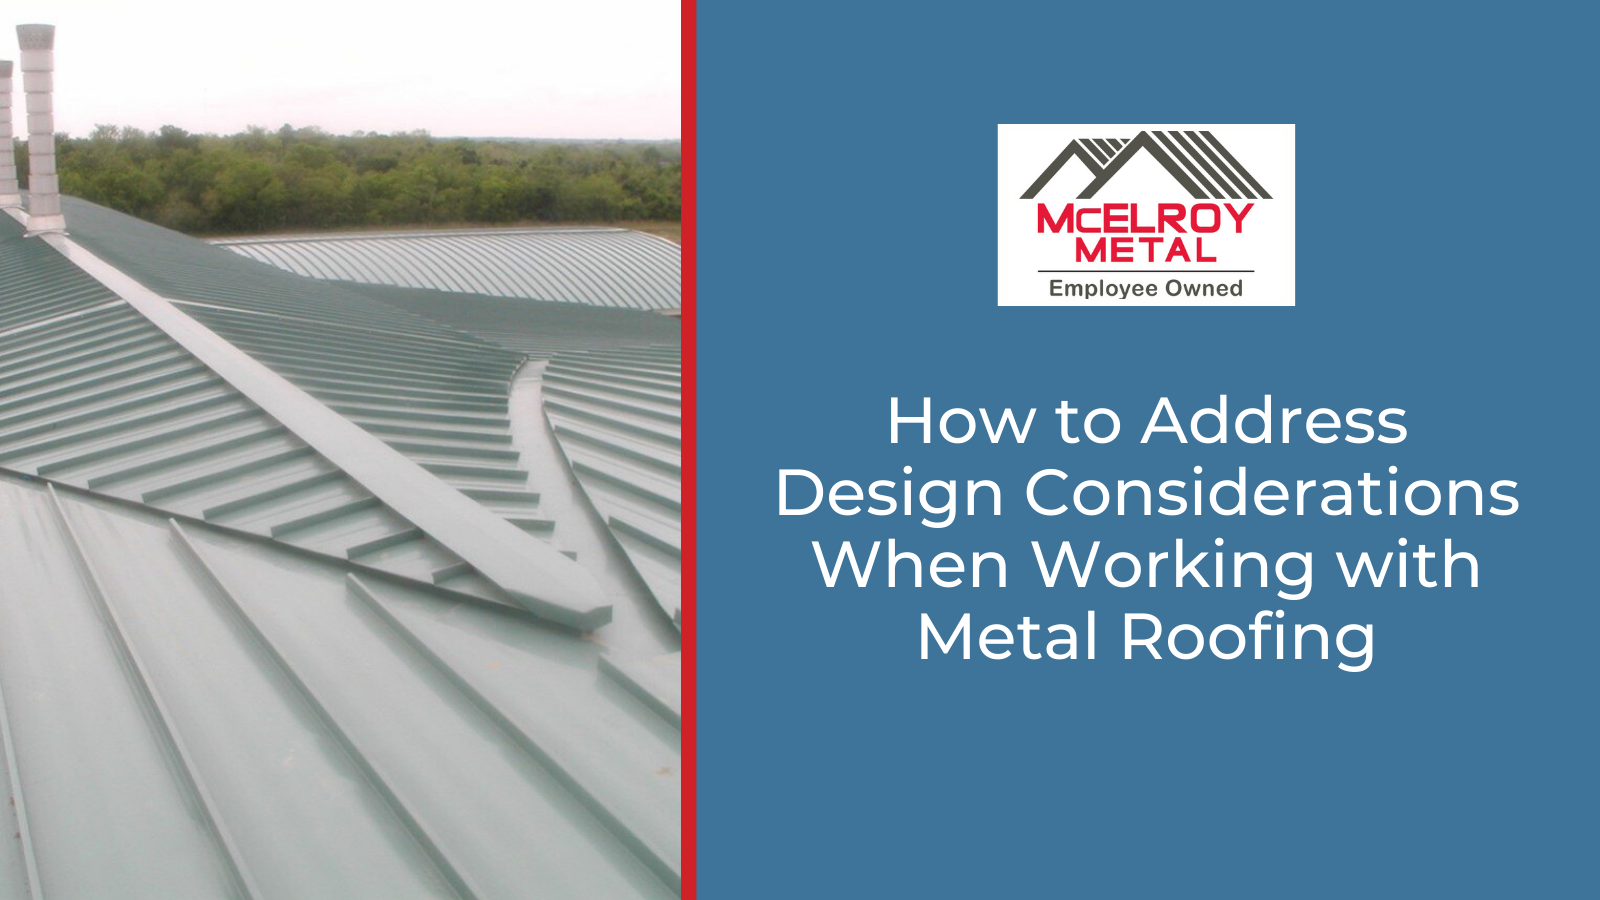 How to Address Design Considerations When Working with Metal Roofing